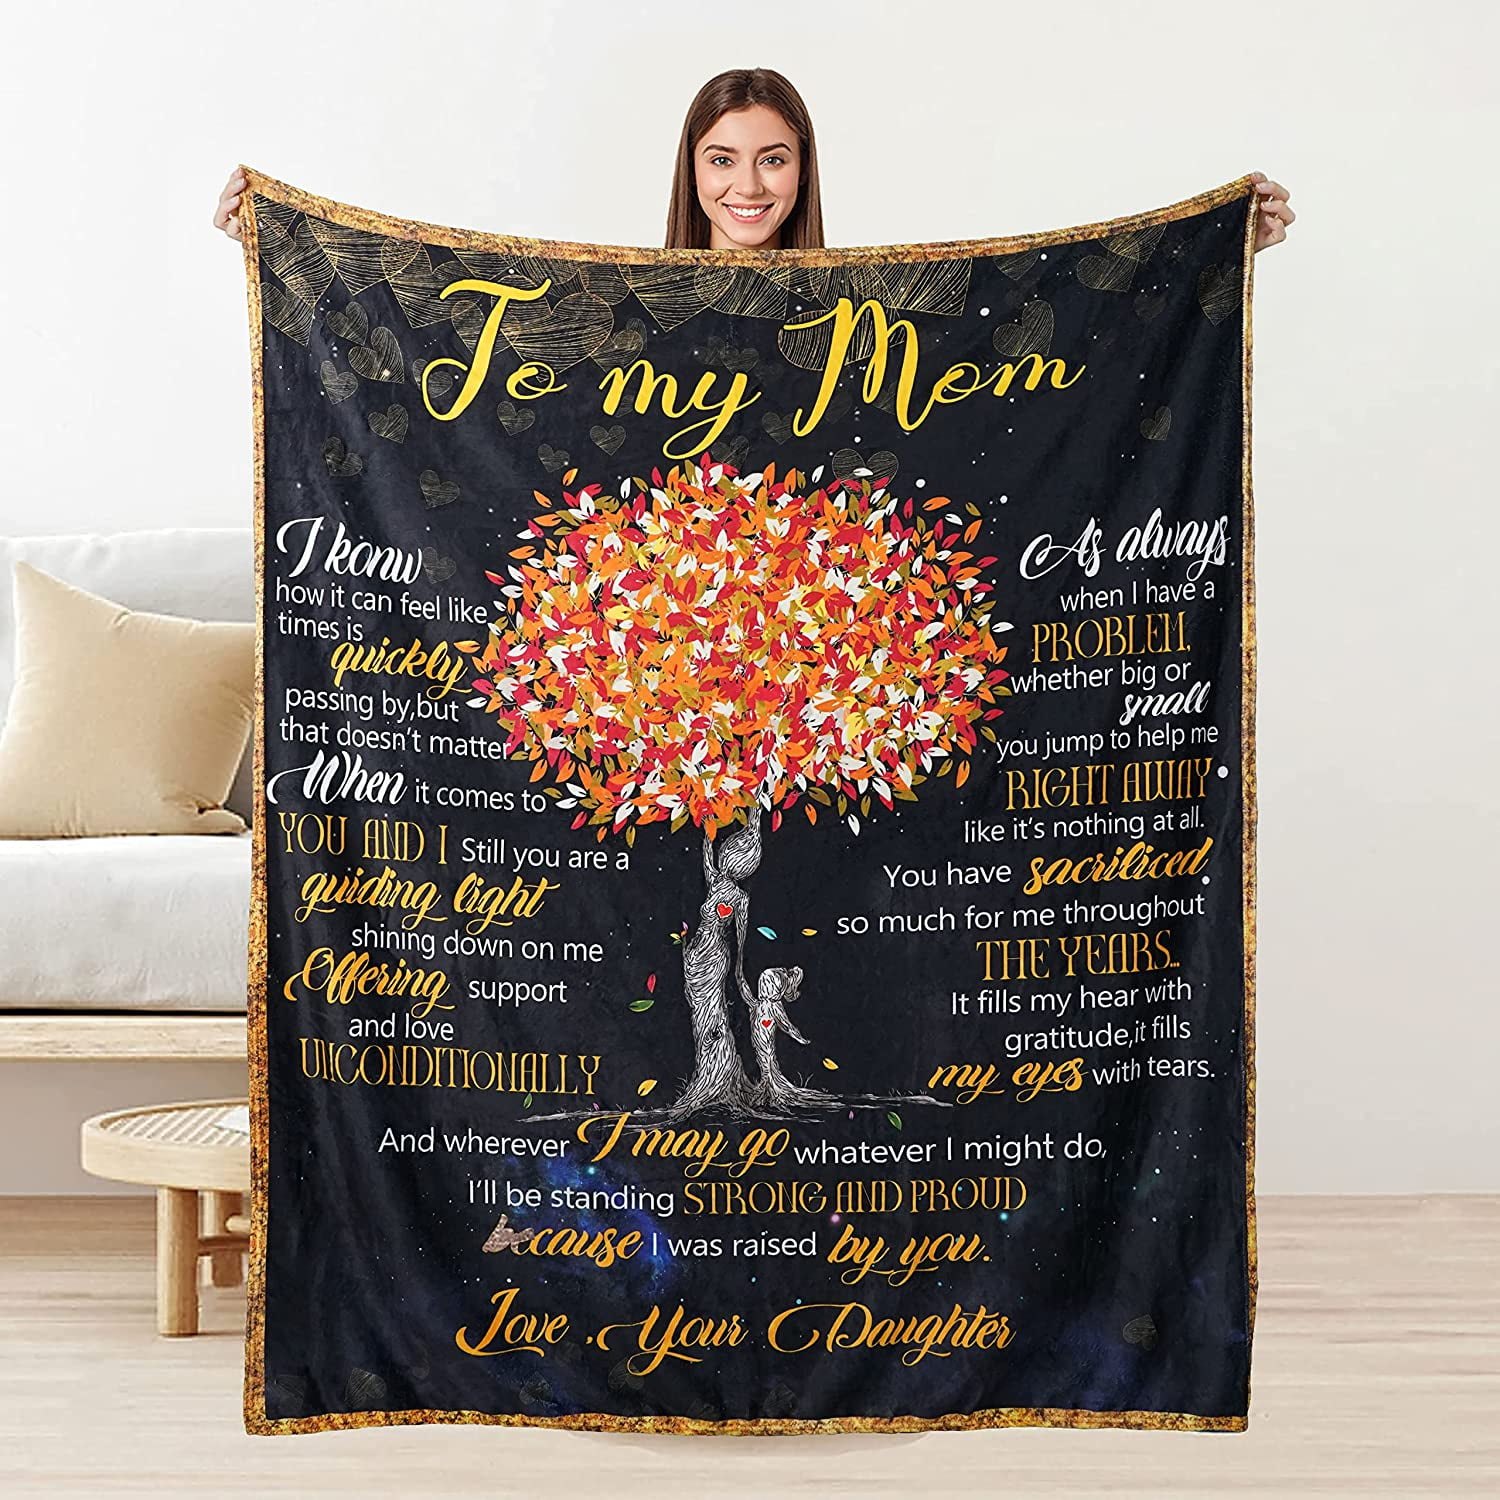 Gifts for Mom, Mom Gifts, Birthday Gifts for Mom, Mom Birthday Gifts, for  Mom, Mom Gifts from Daughters, I Love You Mom Blanket, Soft Flower Throw